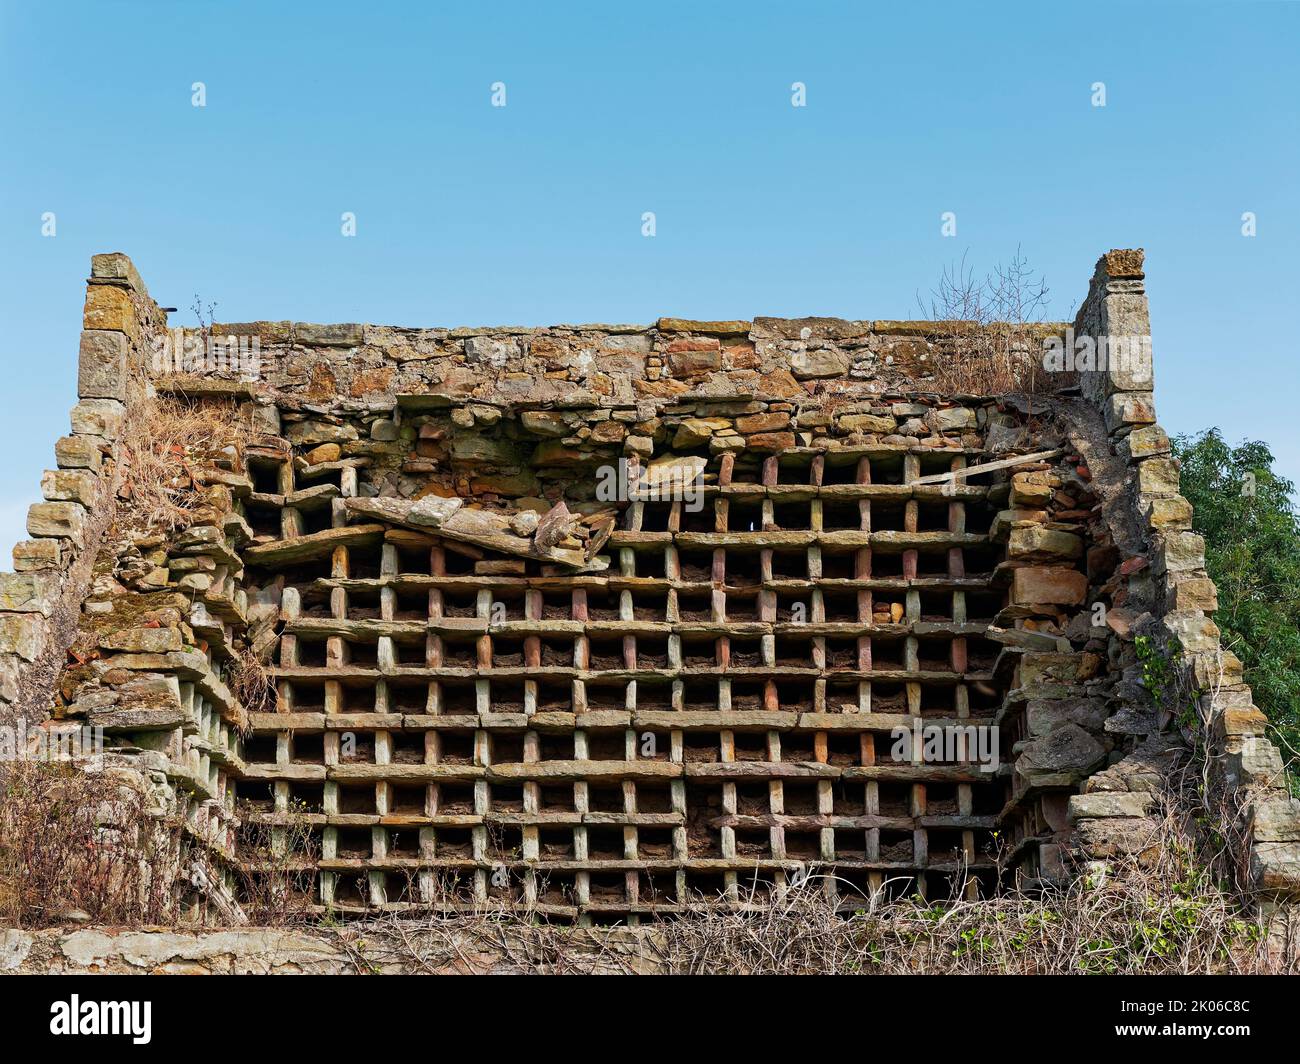 The exposed interior of an Old Dovecot or Doocot, showing the stone nesting boxes that used to host the Pigeons and Doves used as a food source. Stock Photo